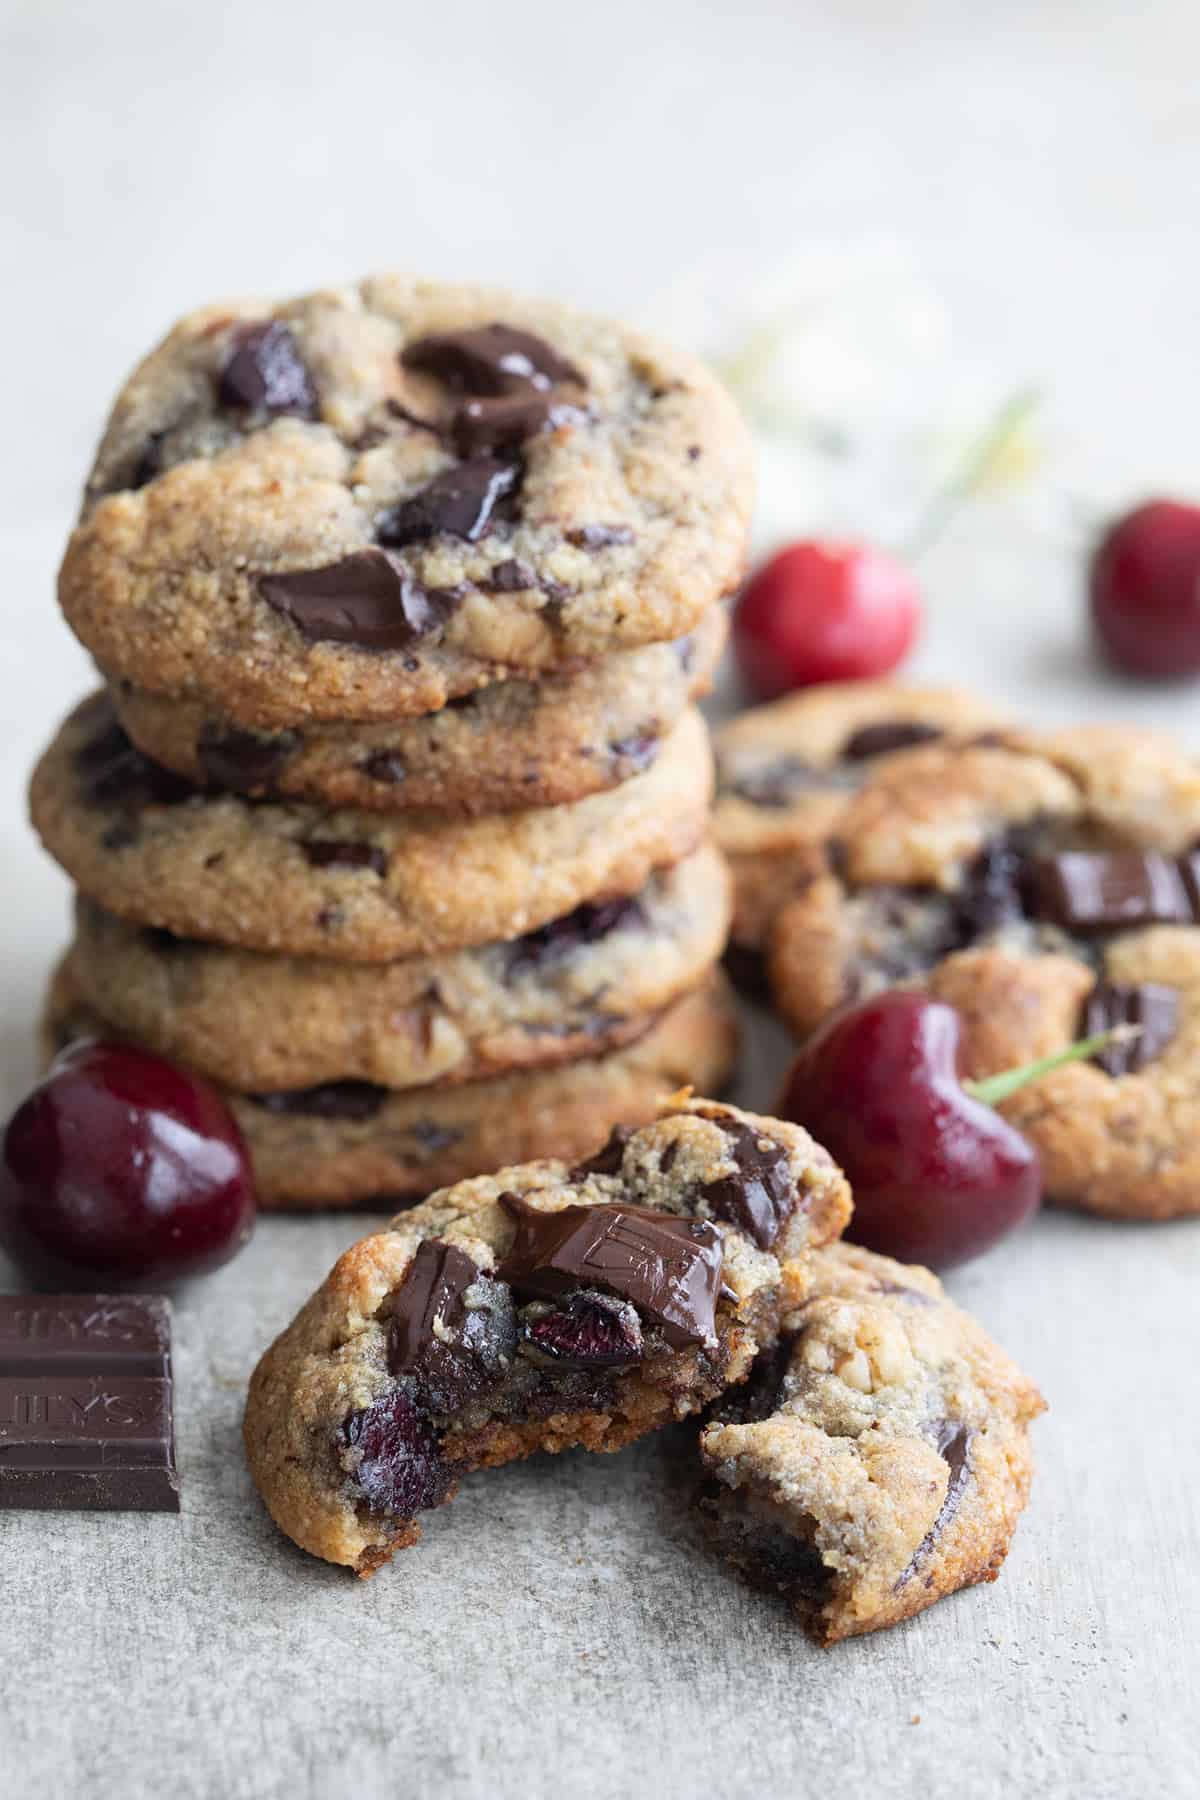 A Cherry Chocolate Chunk Cookie broken open to show the inside.